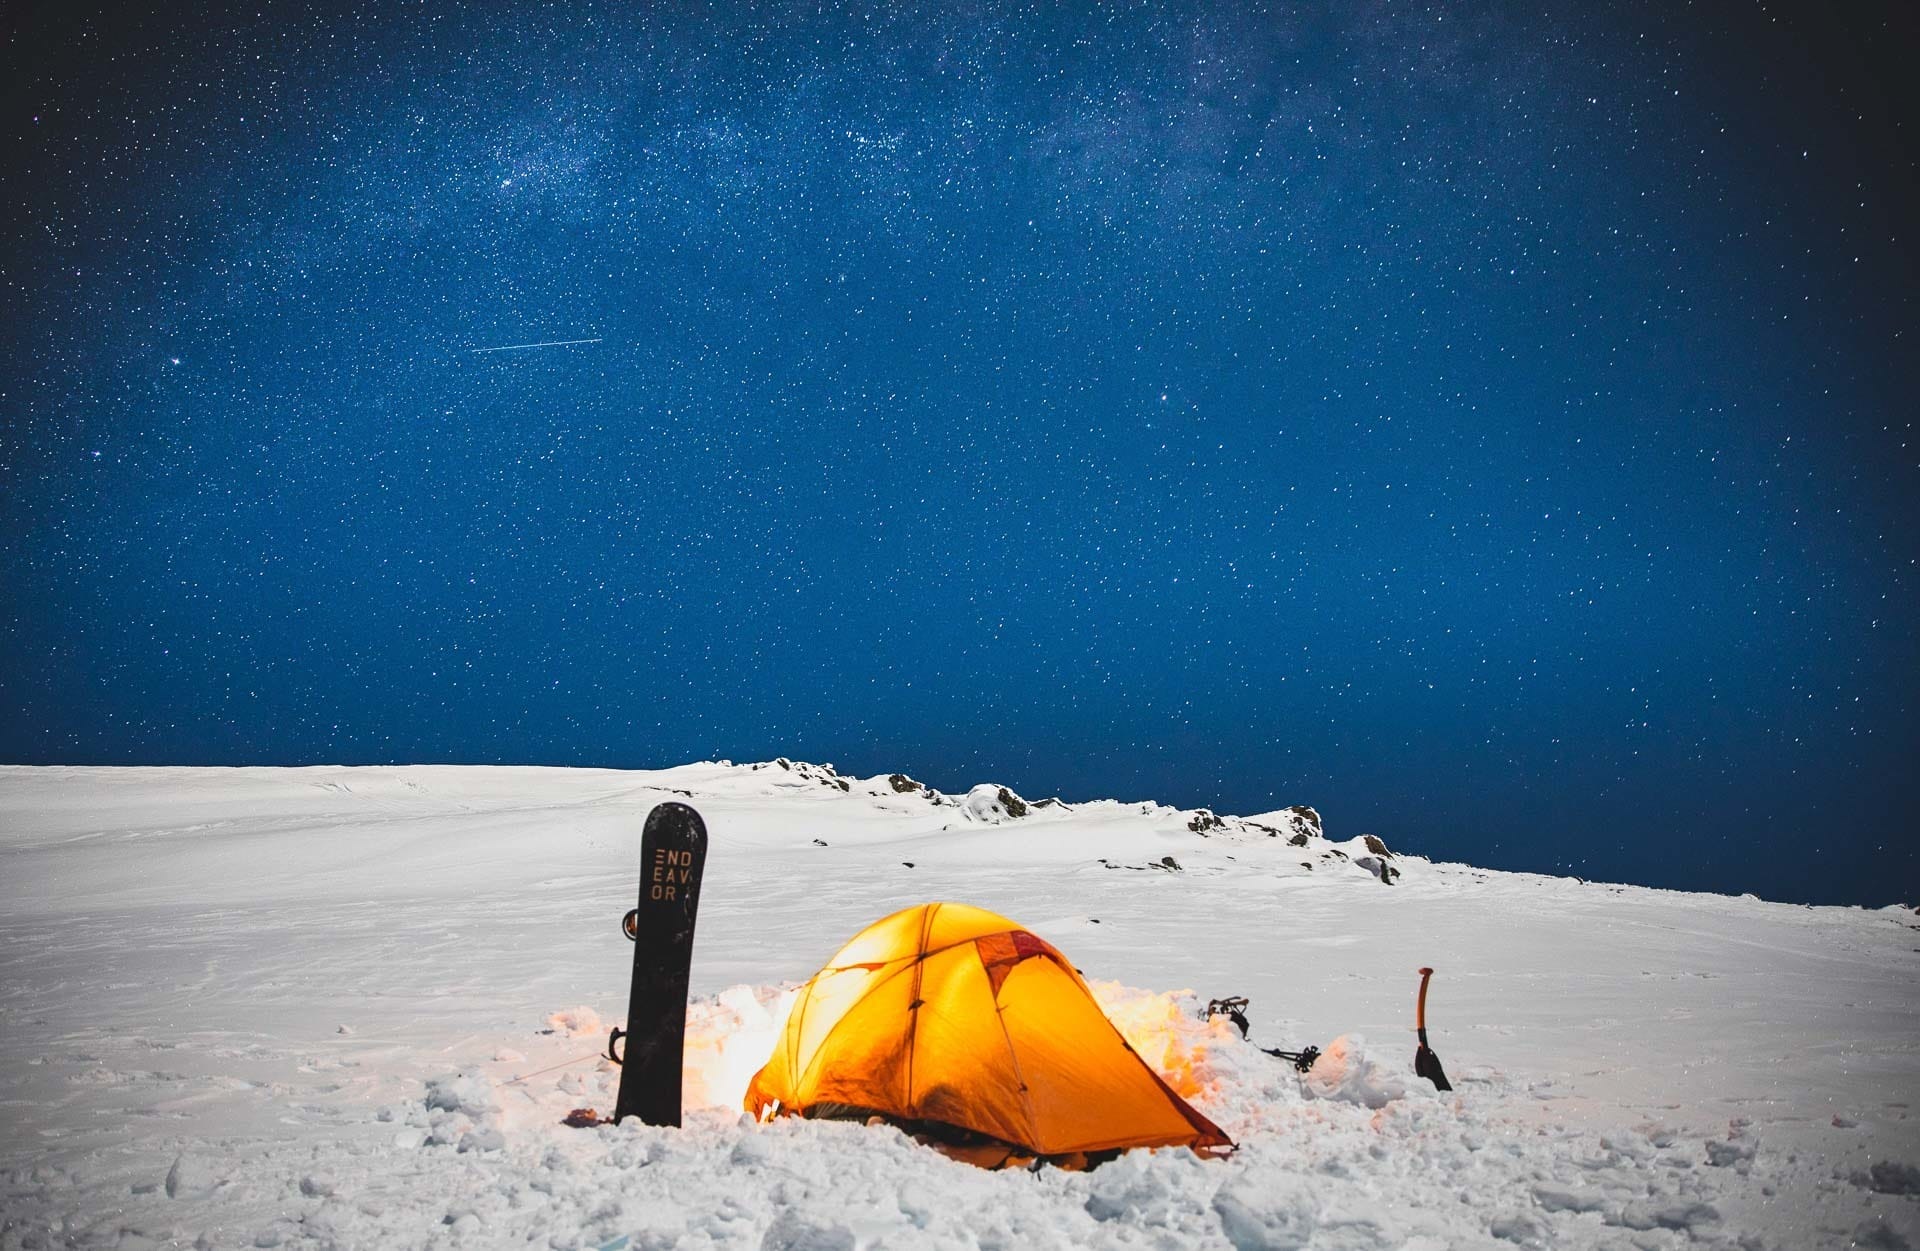 Sea to Summit in Australia – All In A Day's Work, guy williment, astrophotography, backcountry, snow camping, snowboard, nsw